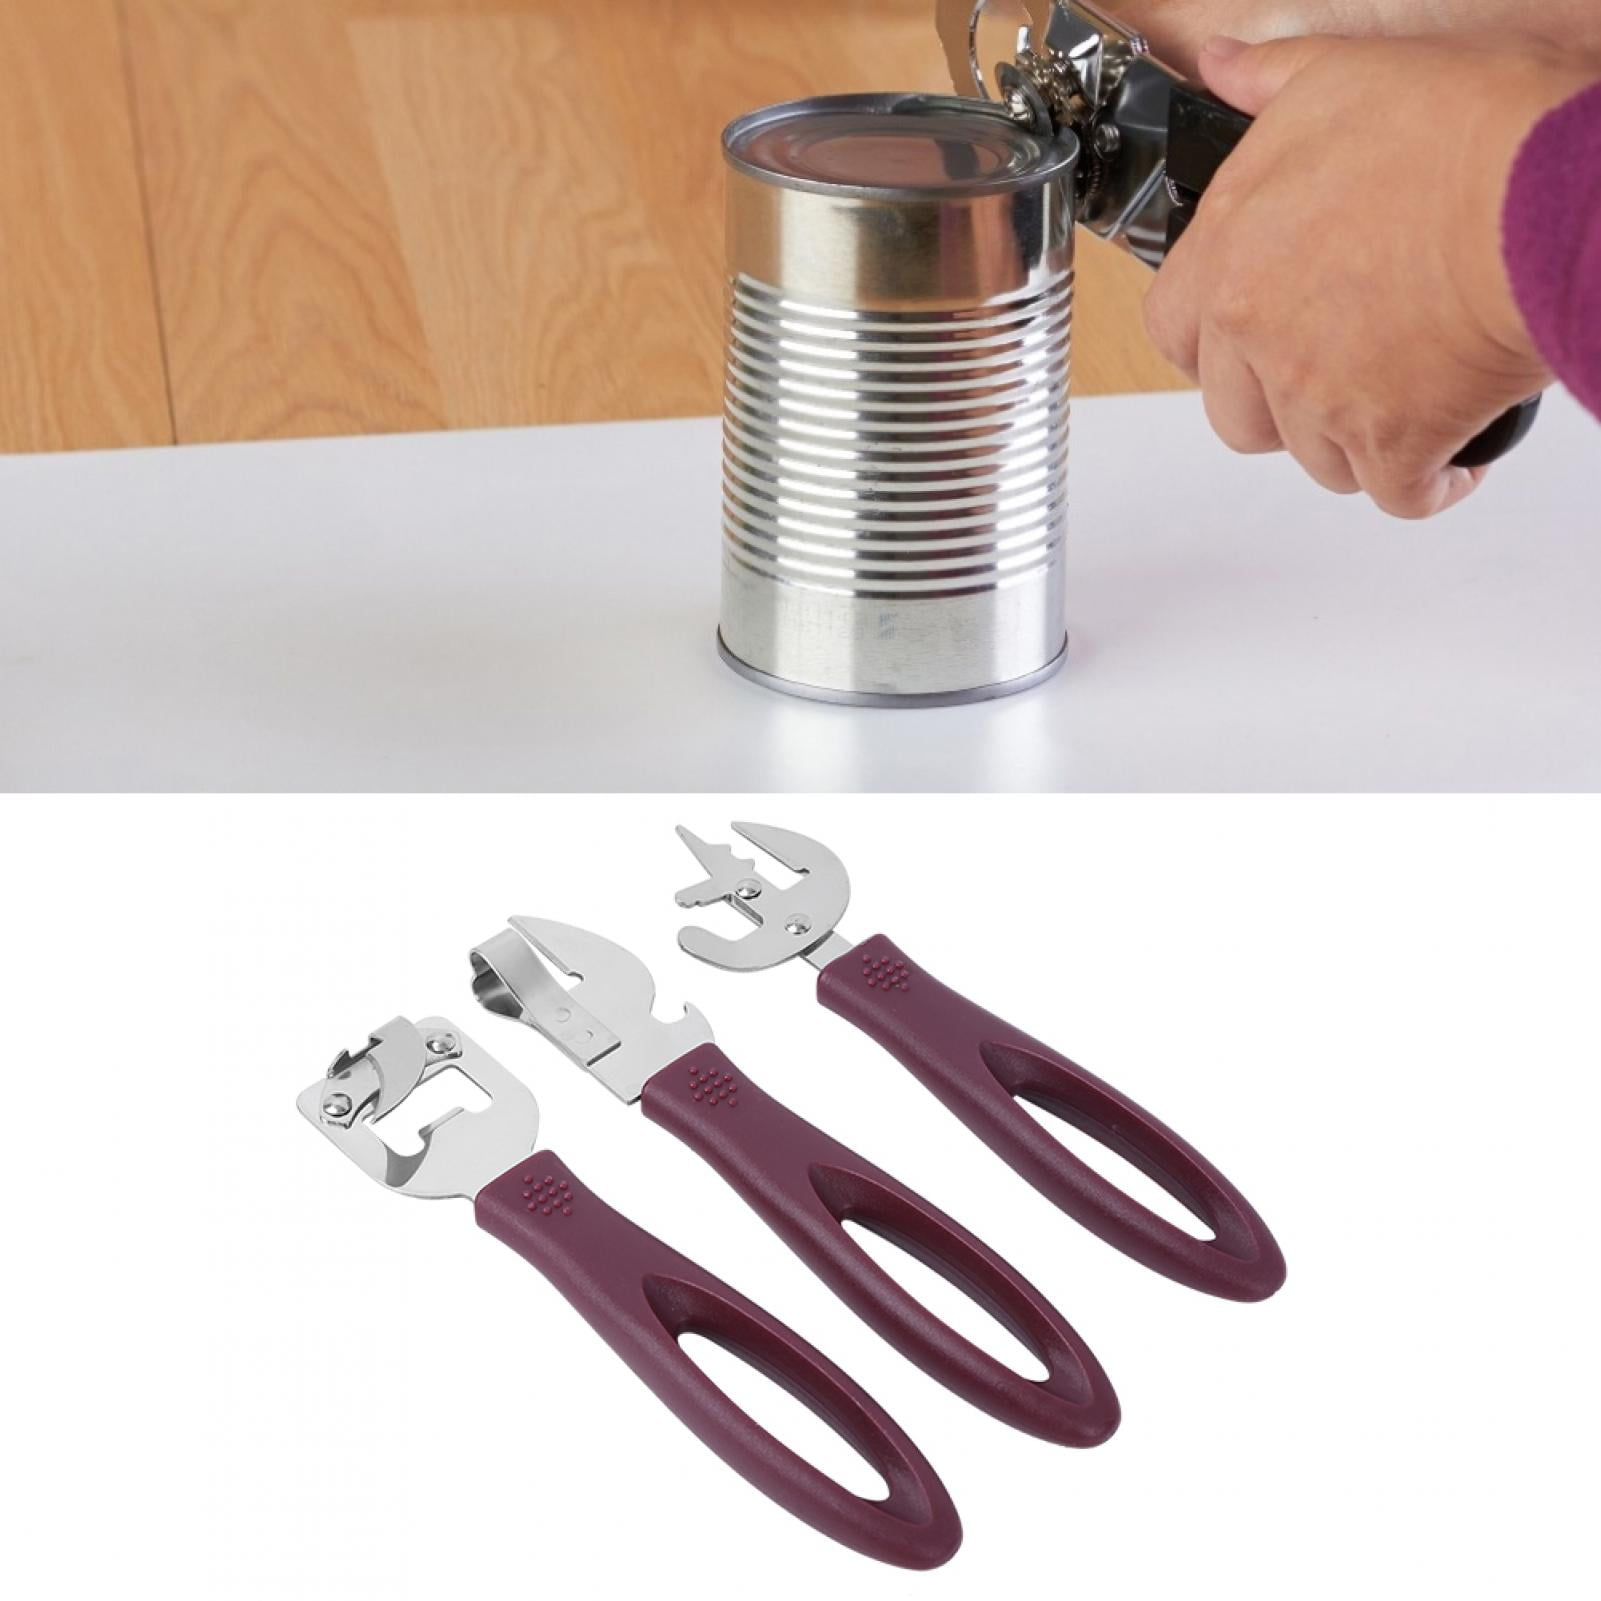 Practical Stainless Food Tin Can Jar Bottle Opener Butterfly Design Kitchen Tool